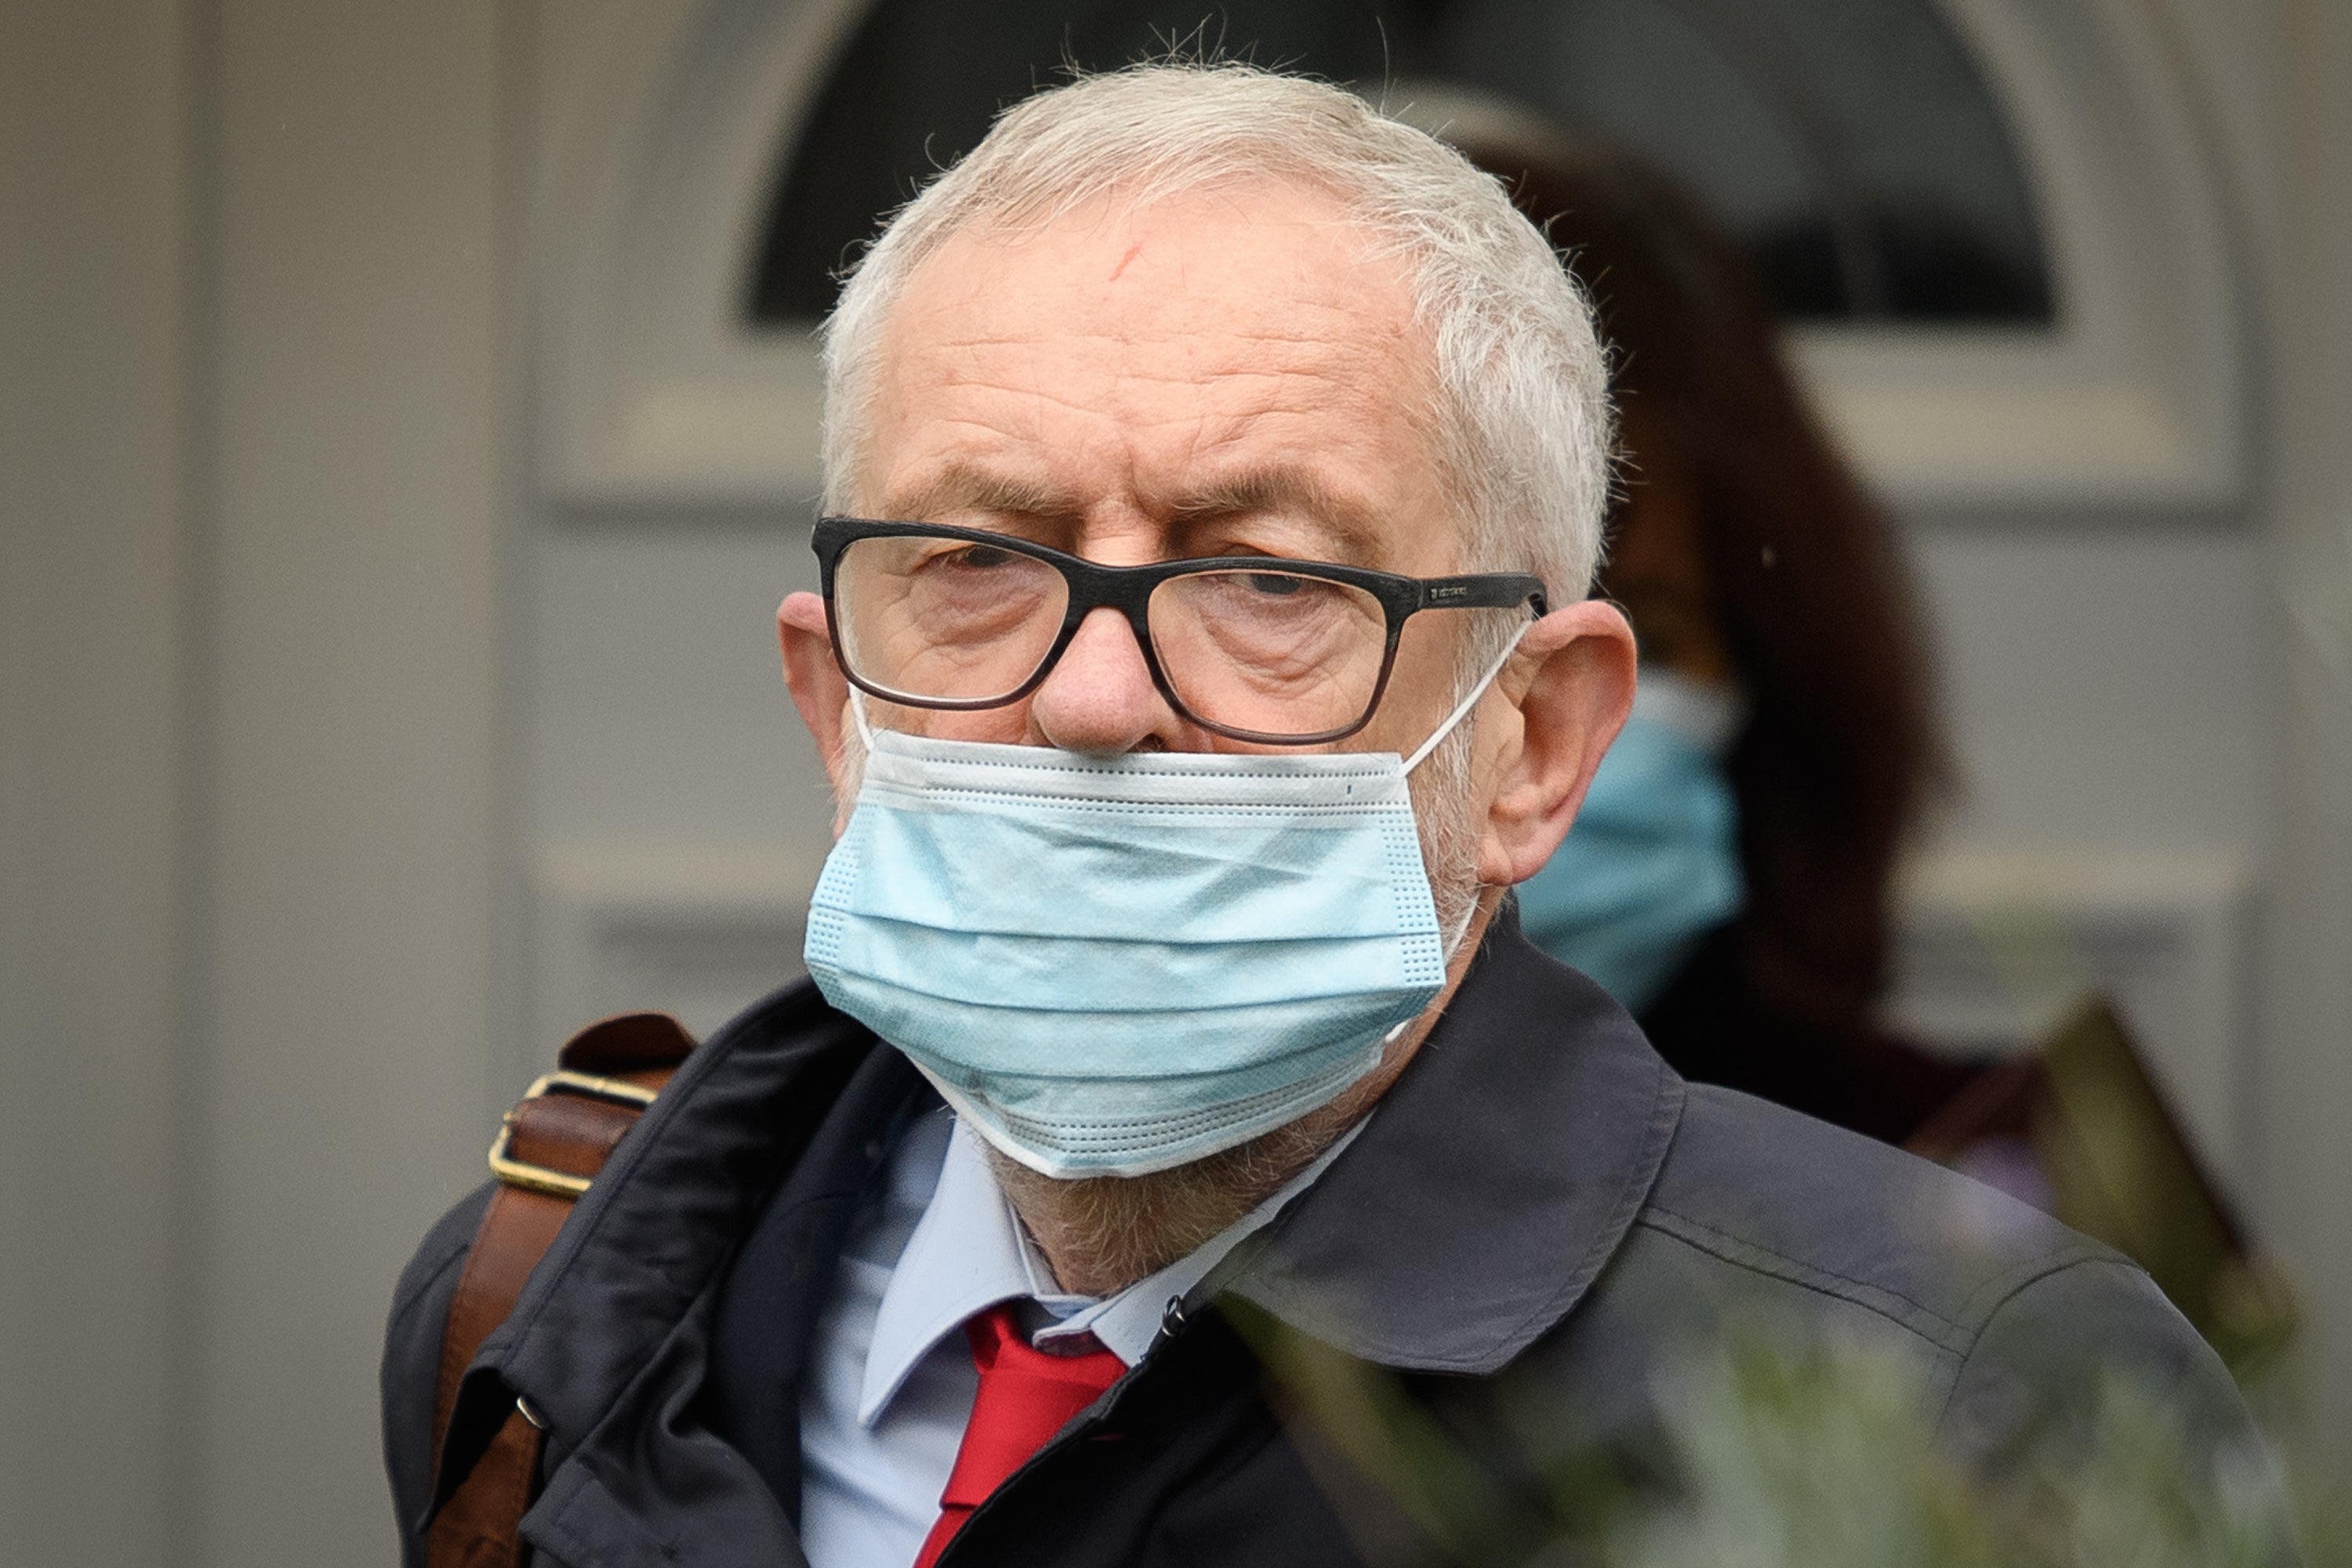 Jeremy Corbyn leaves home ahead of the publication of a report into antisemitism within the Labour Party